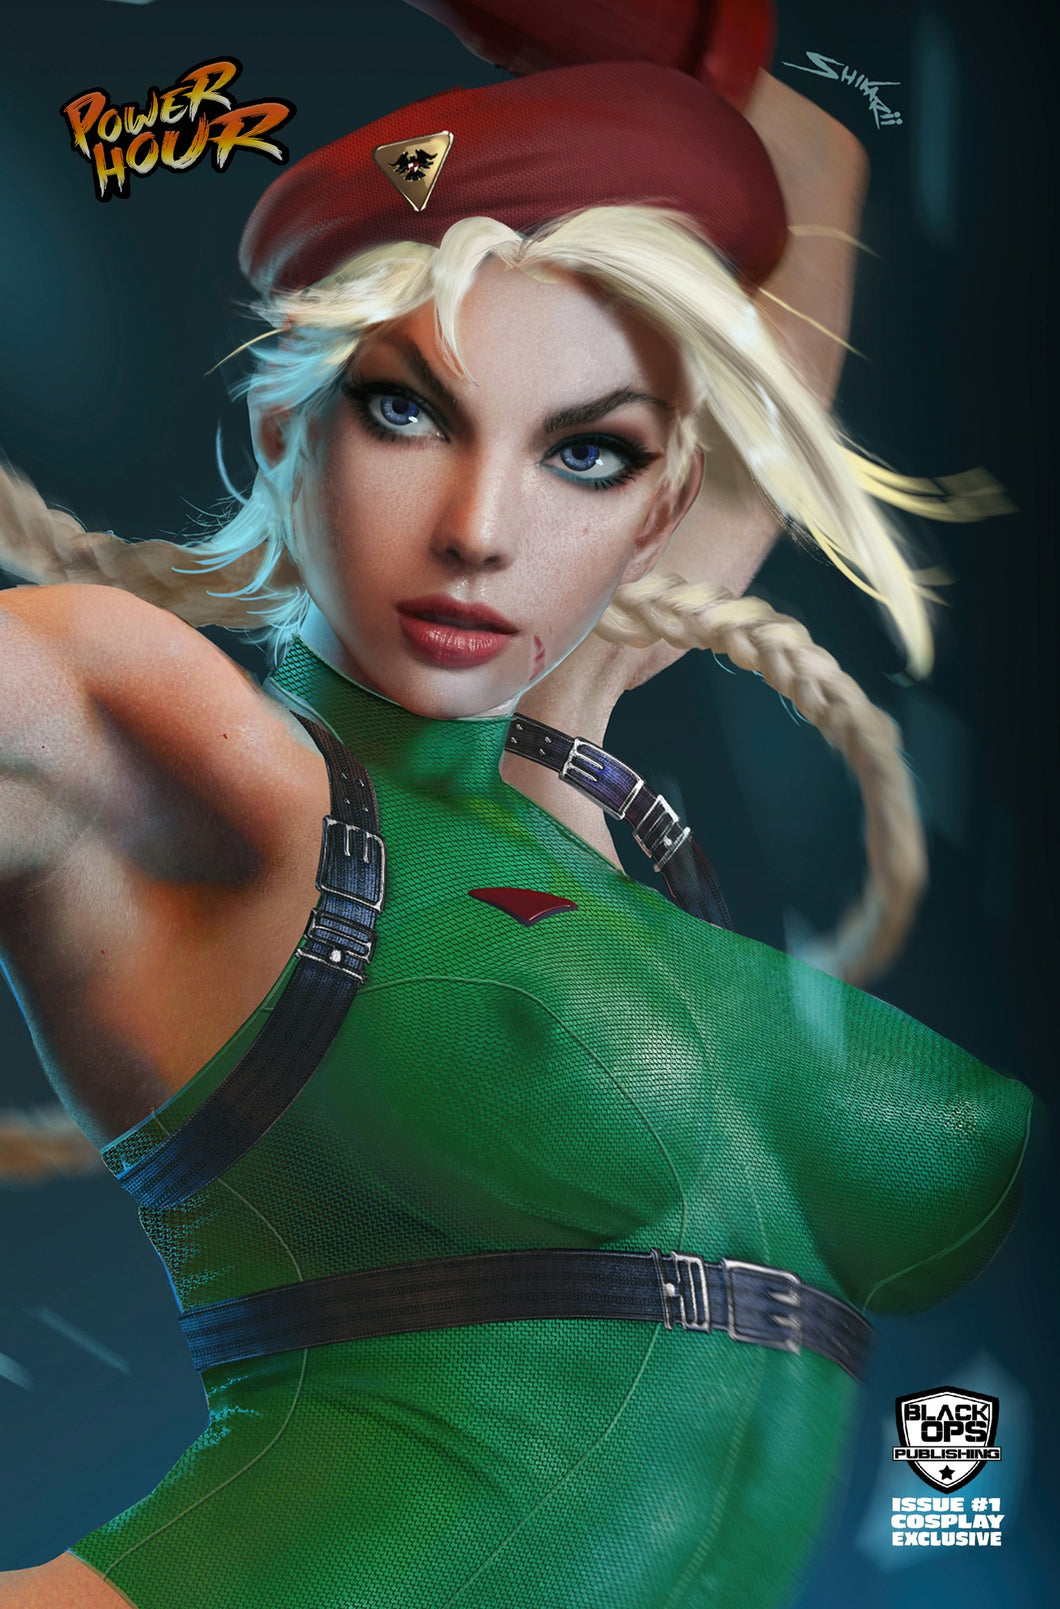 Power Hour Shikarii Cammy Fighter Close Up Cosplay Limited to ONLY 200  !! NM